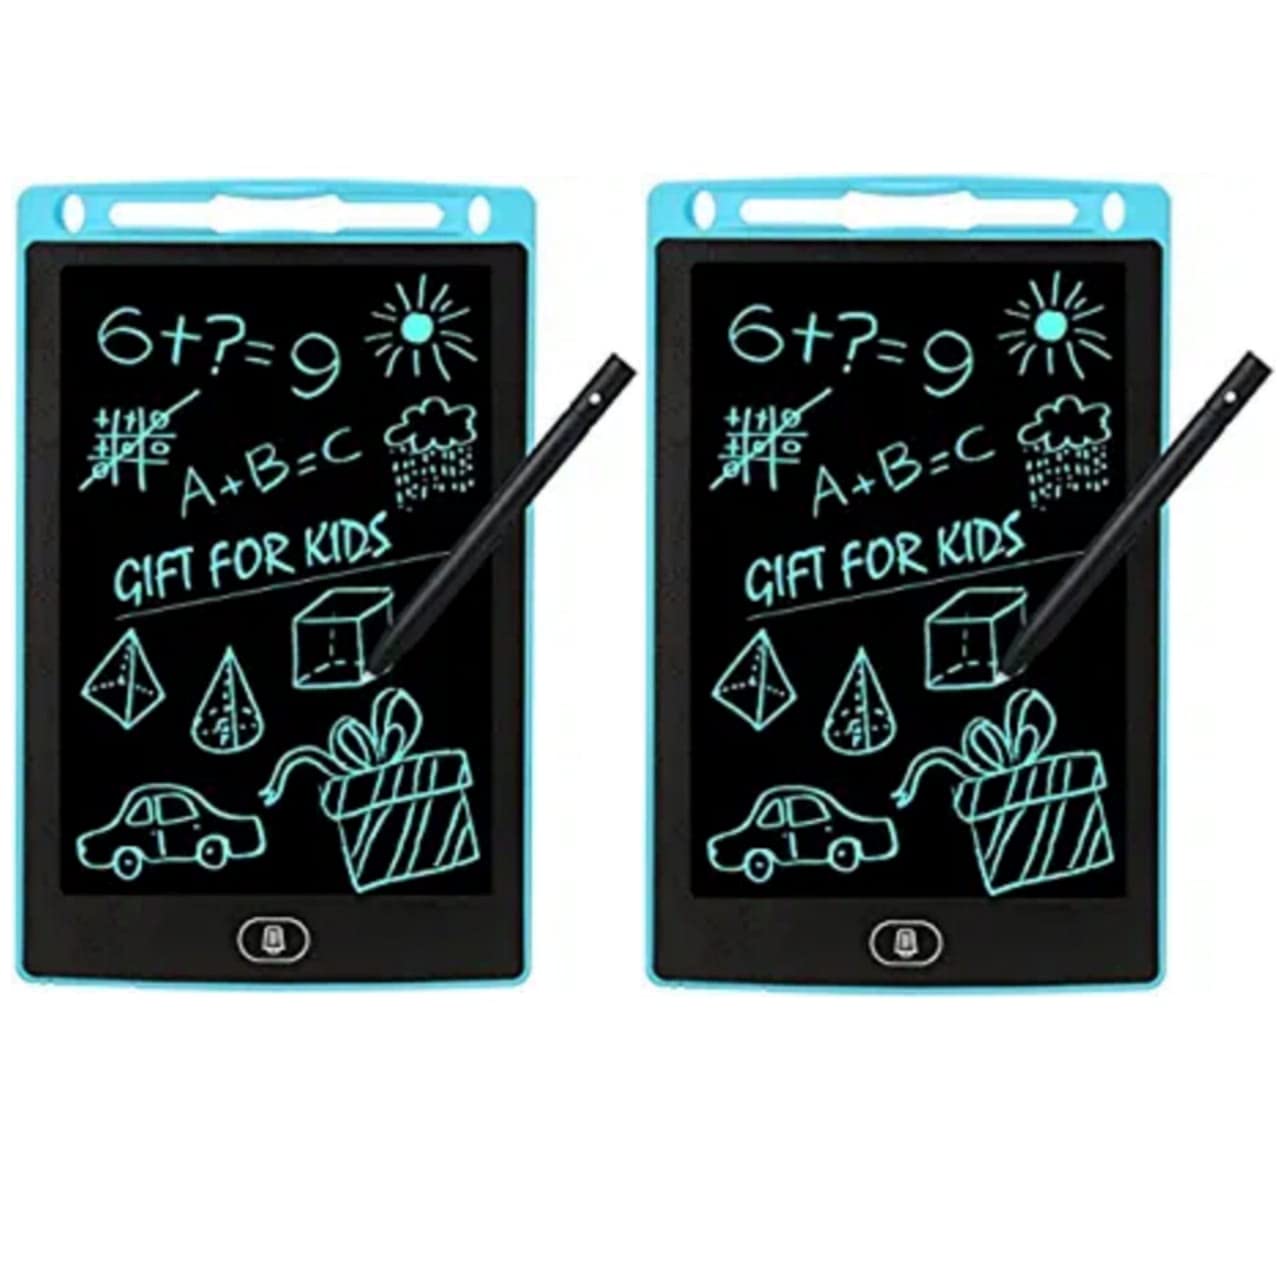 Tvara Lcd Writing Tablet 8.5 Inch/21.5 Cm E-Note Pad Lcd Colorful Drawing Tablet Kids Drawing Pad 8.5 Inch Doodle Board,Toddler Boy And Girl Learning Gift Variation (Pack Of 2) Black Blue